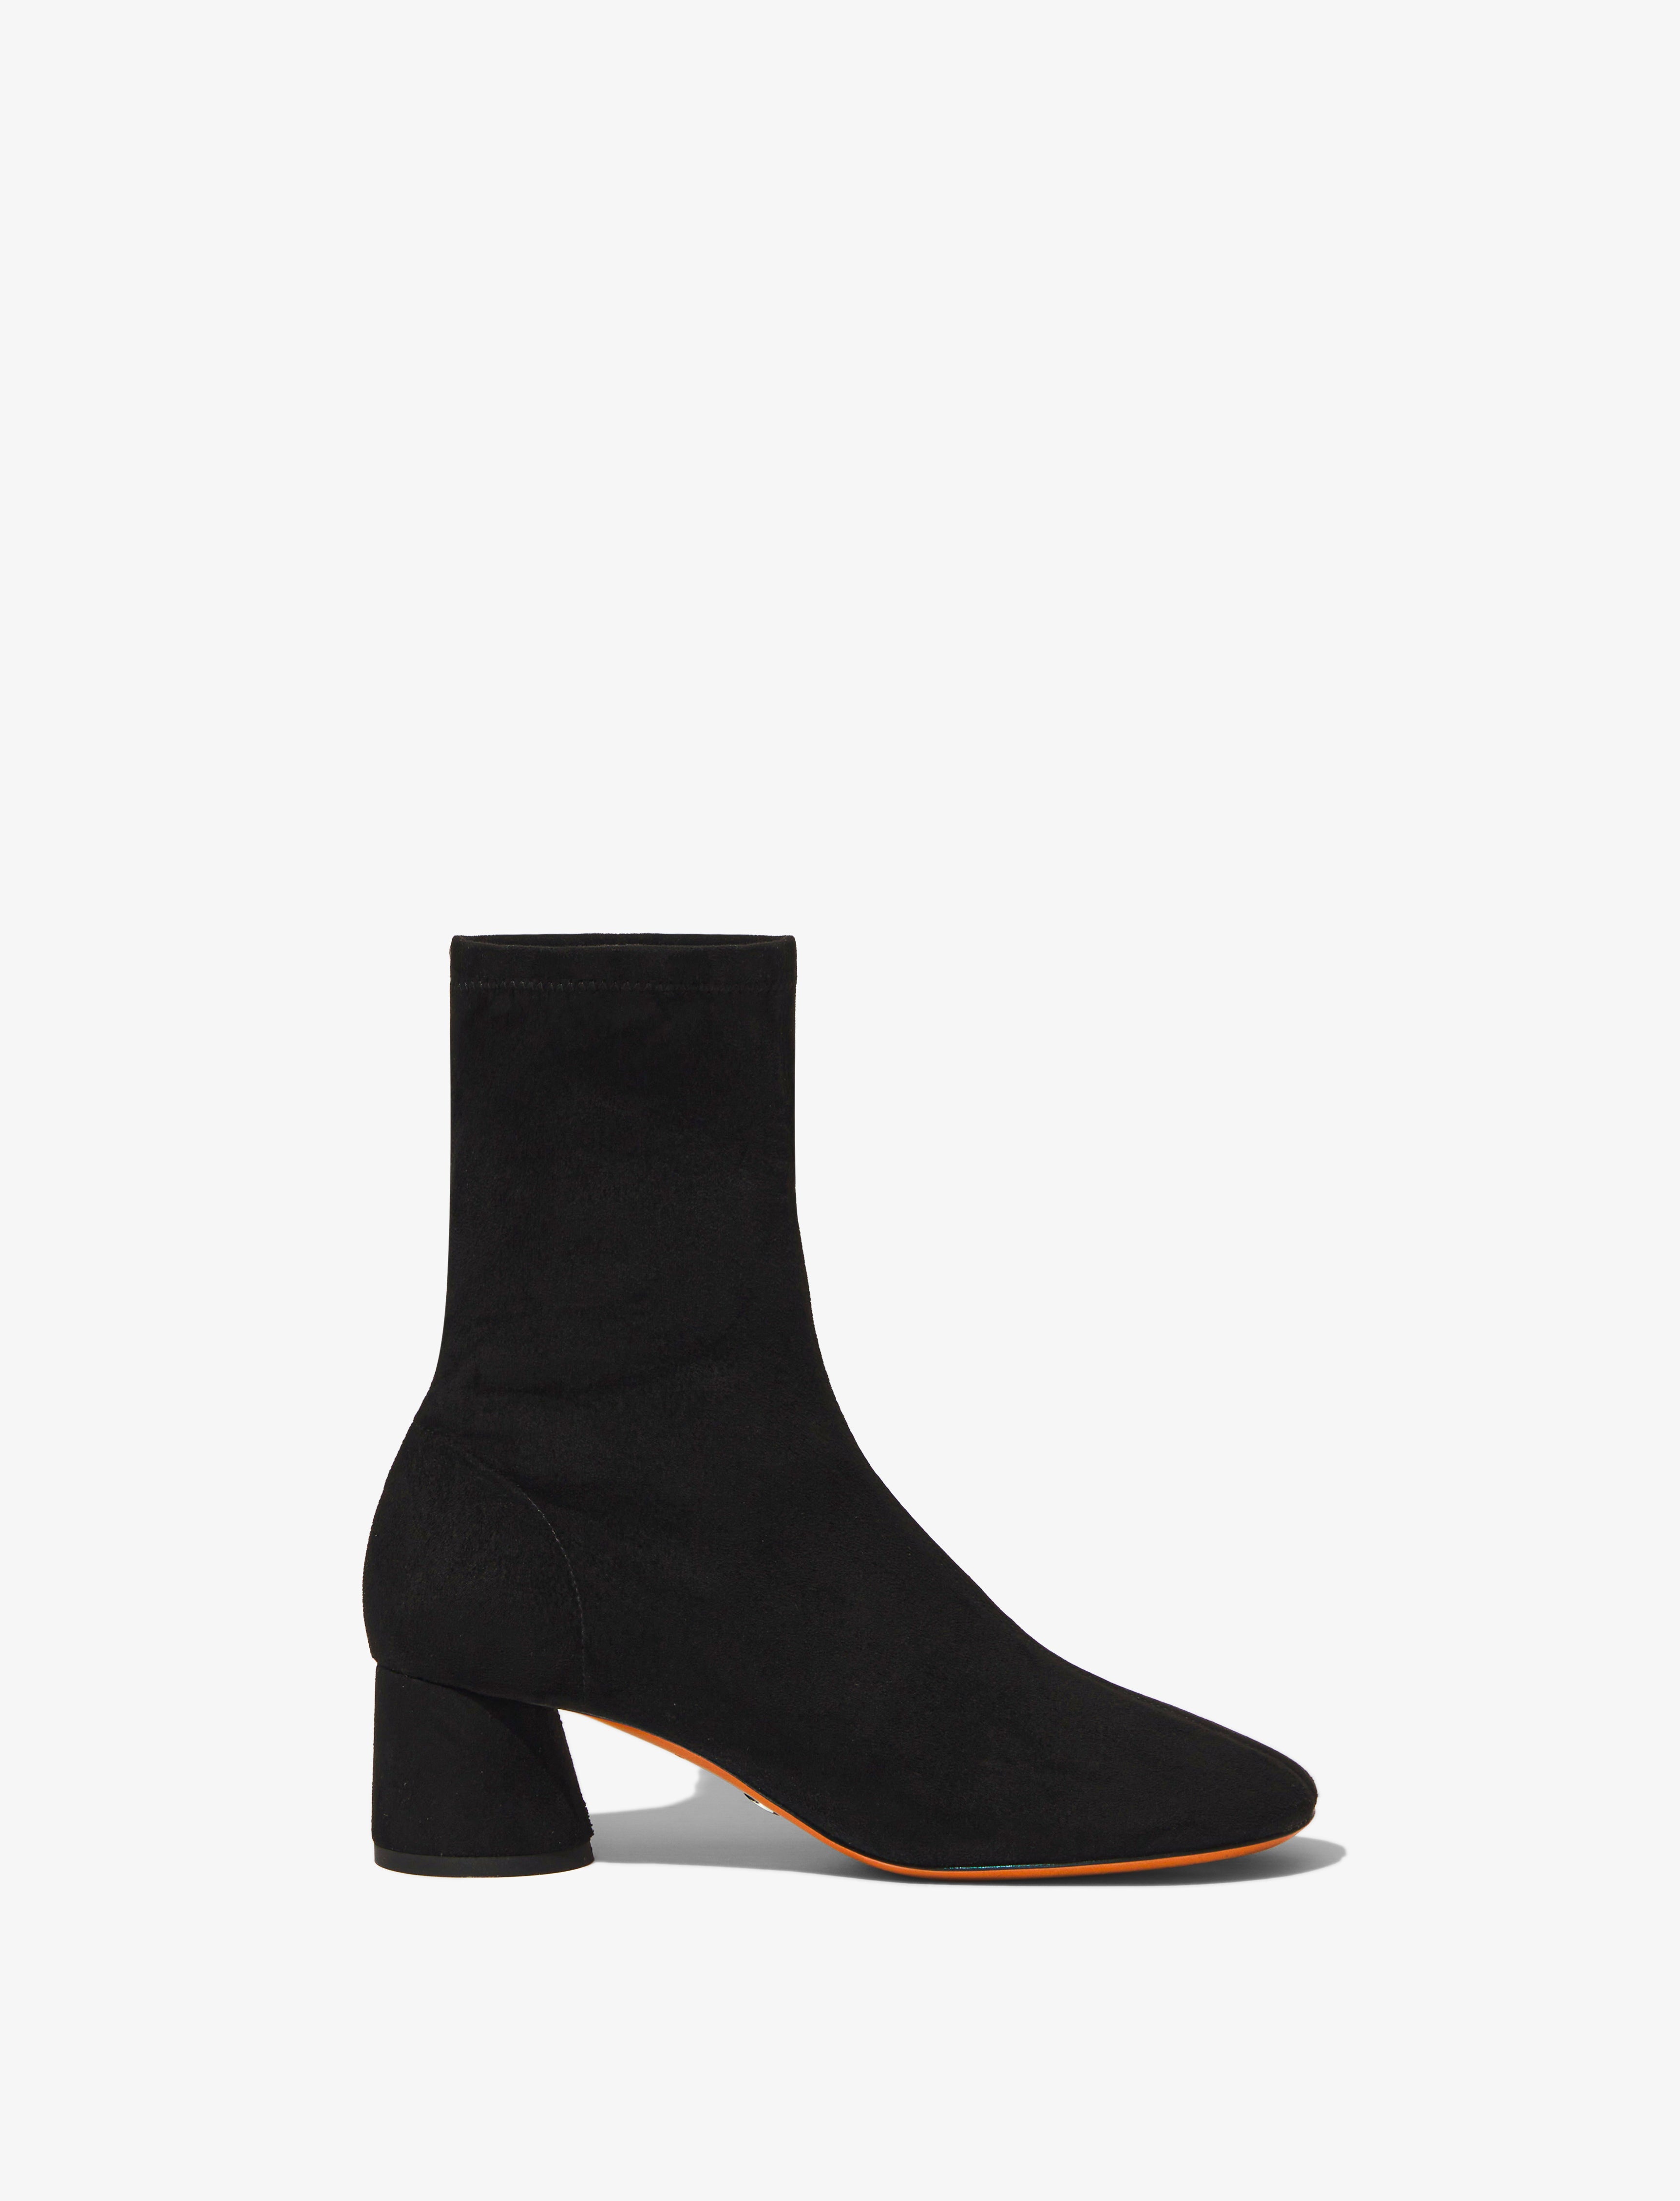 Glove Stretch Ankle Boots in Faux Suede - 1